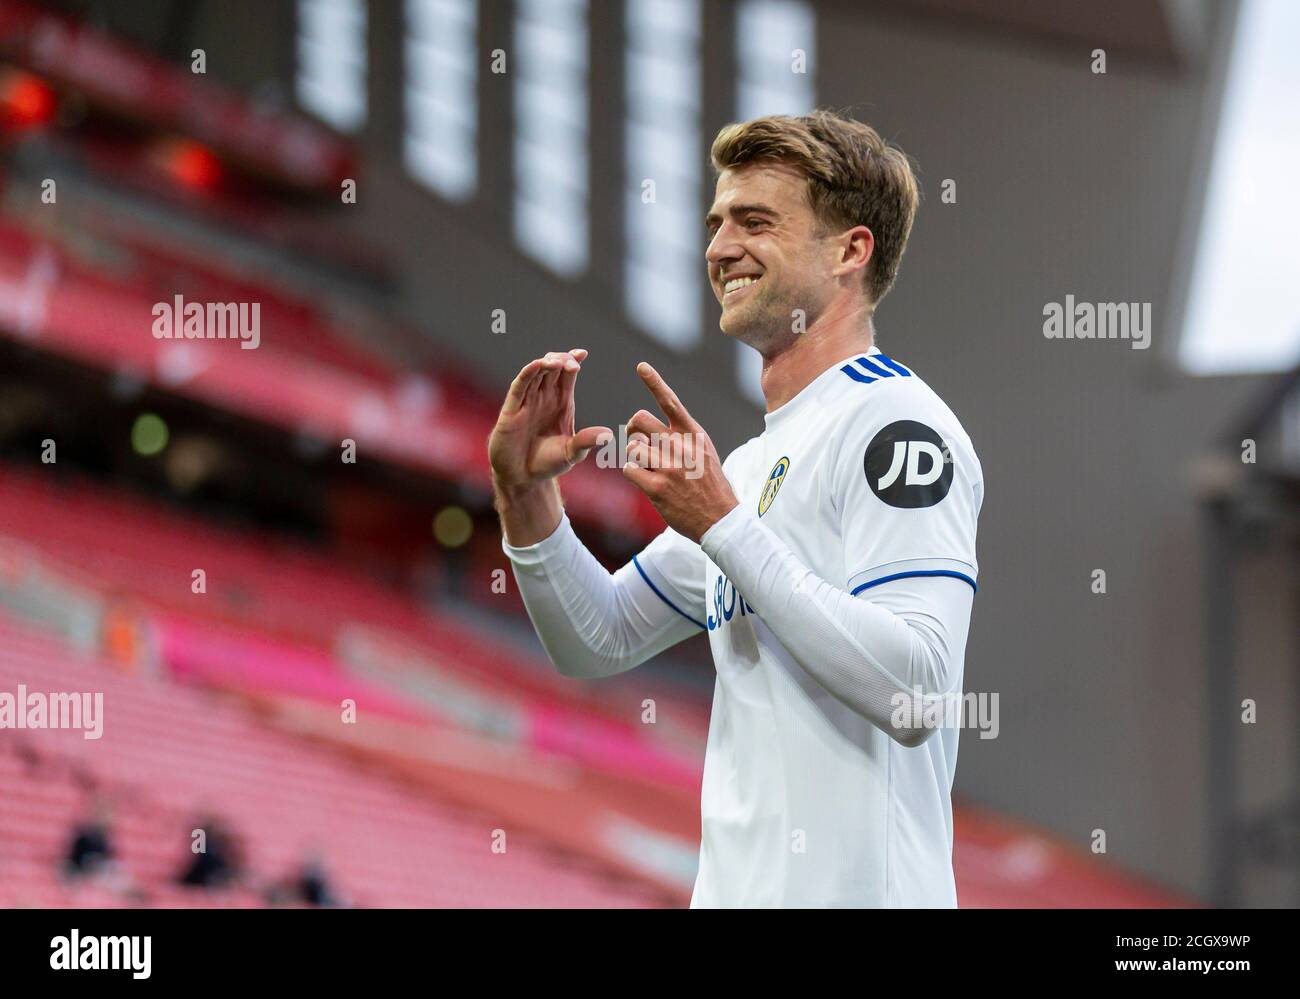 Liverpool. 13th Sep, 2020. Leeds United's Patrick Bamford celebrates after scoring a goal during the English Premier League match between Liverpool FC and Leeds United FC at Anfield in Liverpool, Britain, Sept. 12, 2020. Credit: Xinhua/Alamy Live News Stock Photo